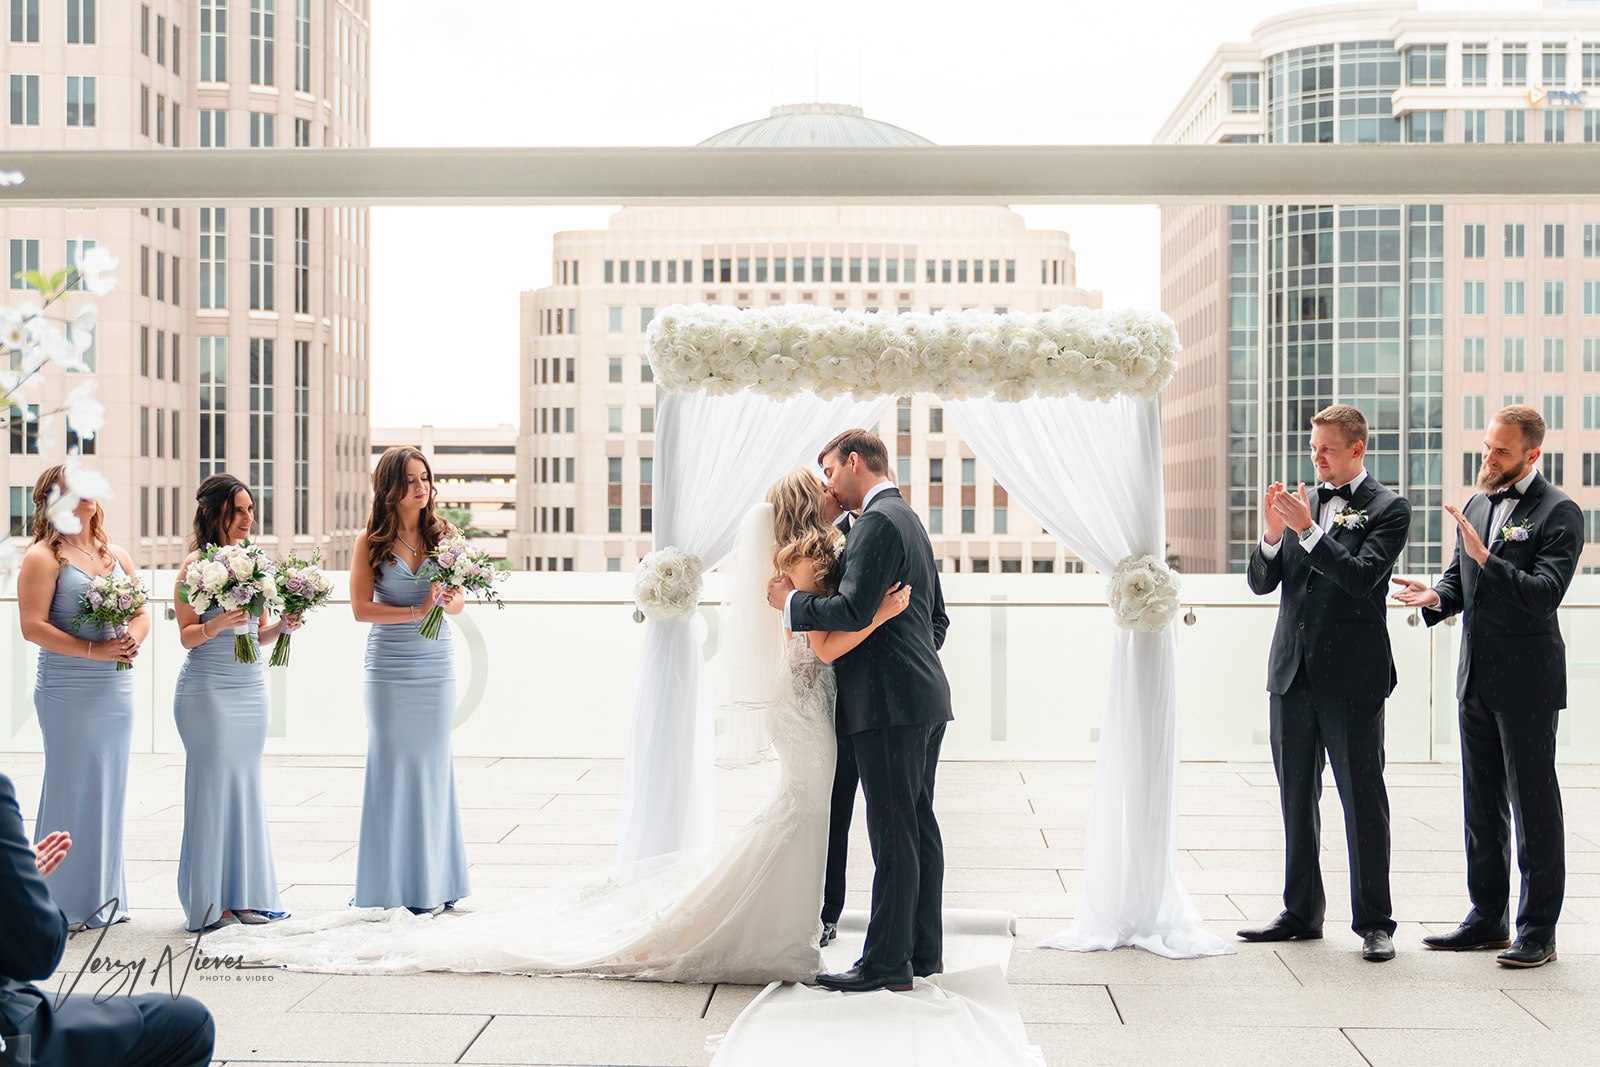 Couple kissing under wedding archway adorned with white roses and elegant white curtains at Dr. Phillips Center for Performing Arts.